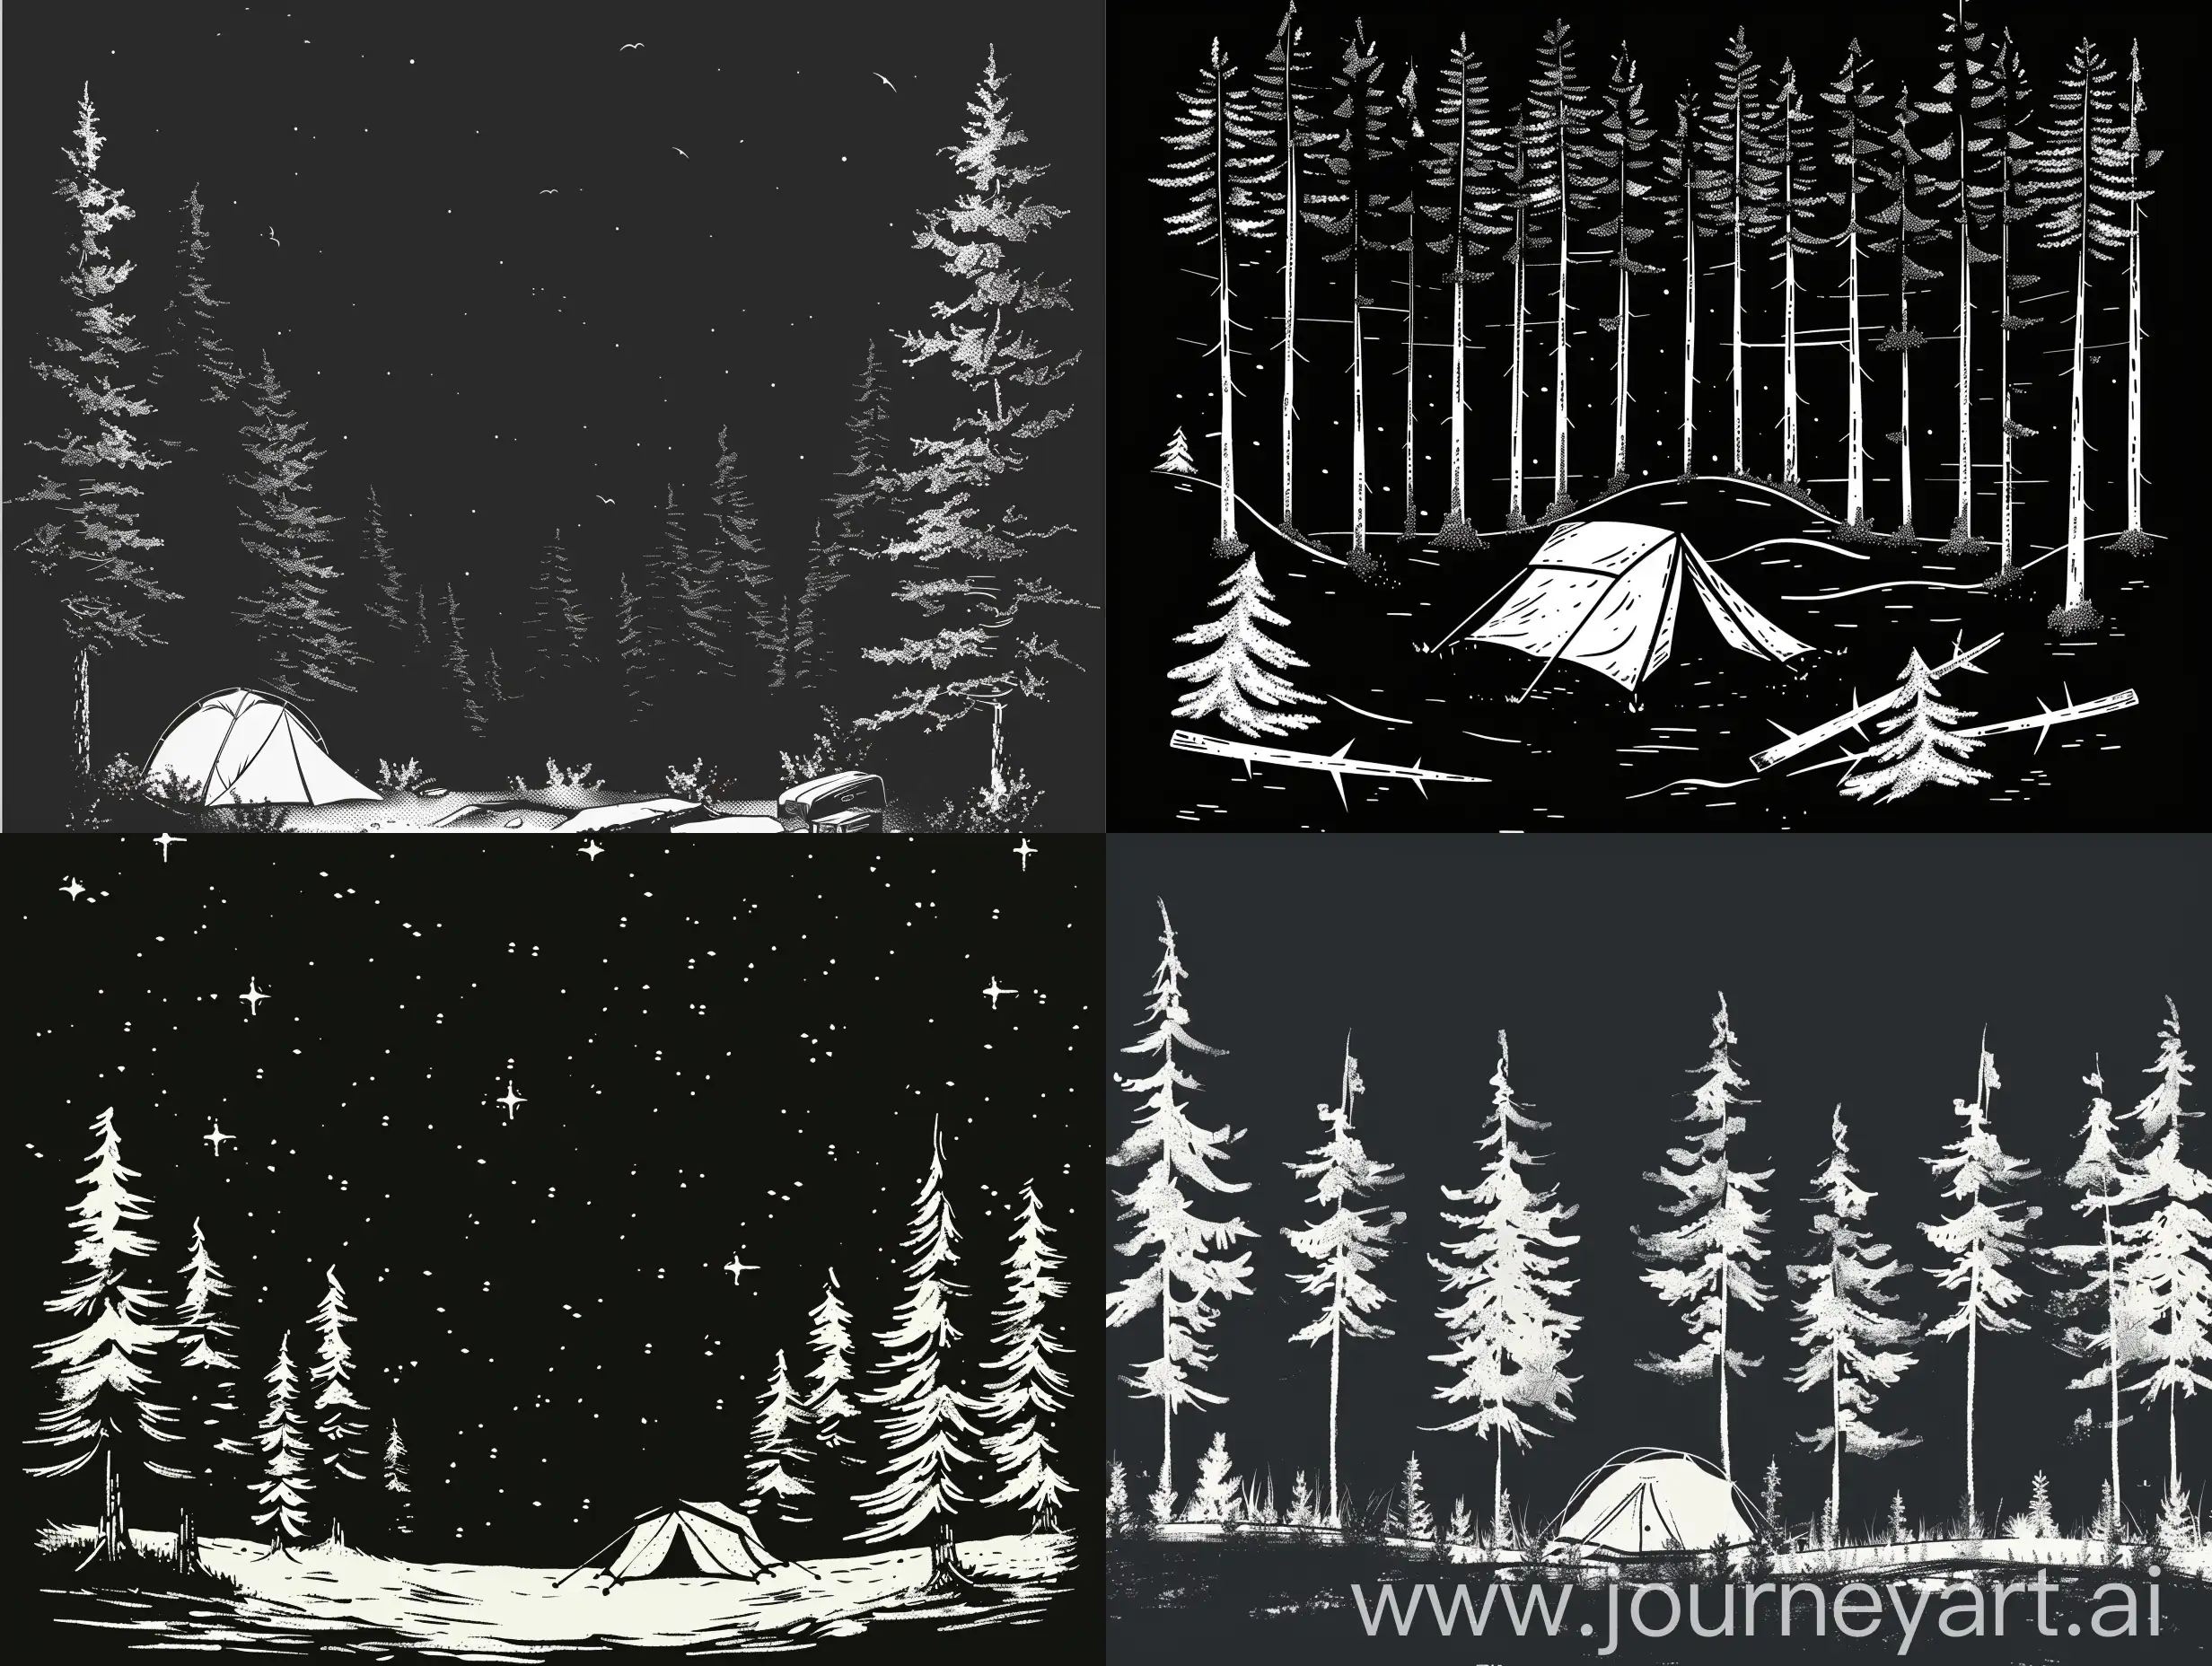 camp in forest, spruces, black background, vector stile white lines